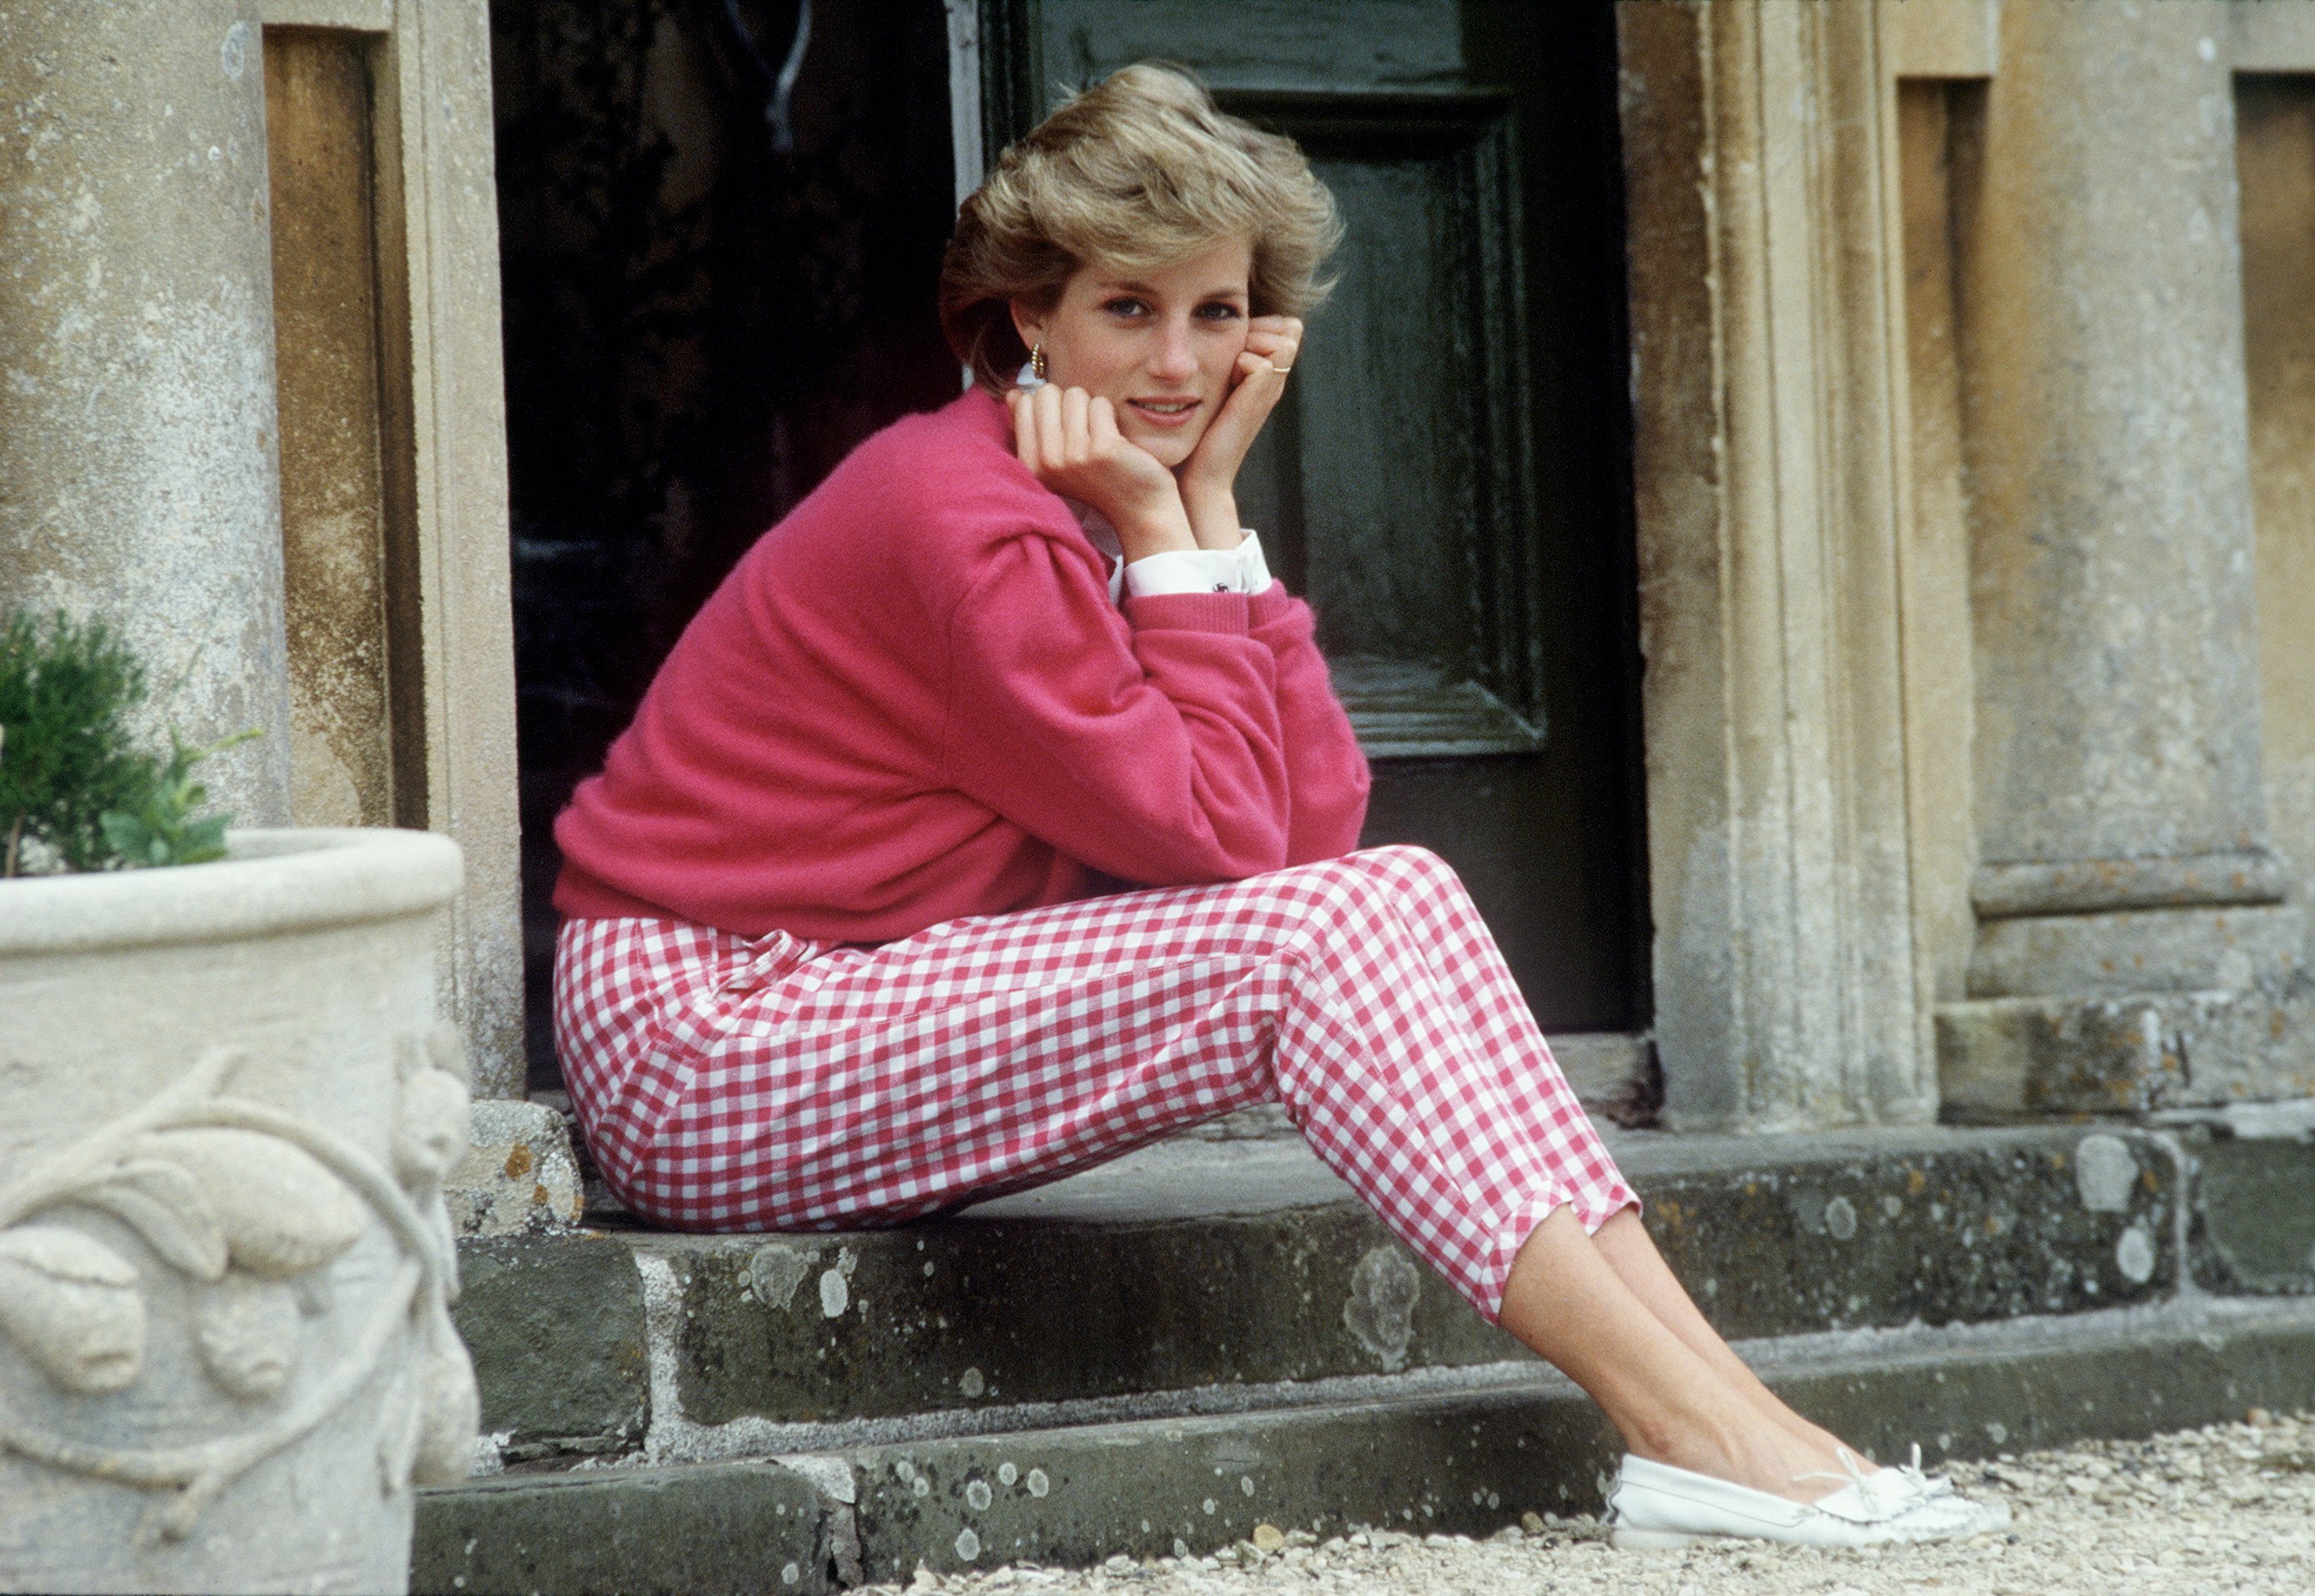 Princess Diana sitting on a step in a pink sweater and matching checkered pants